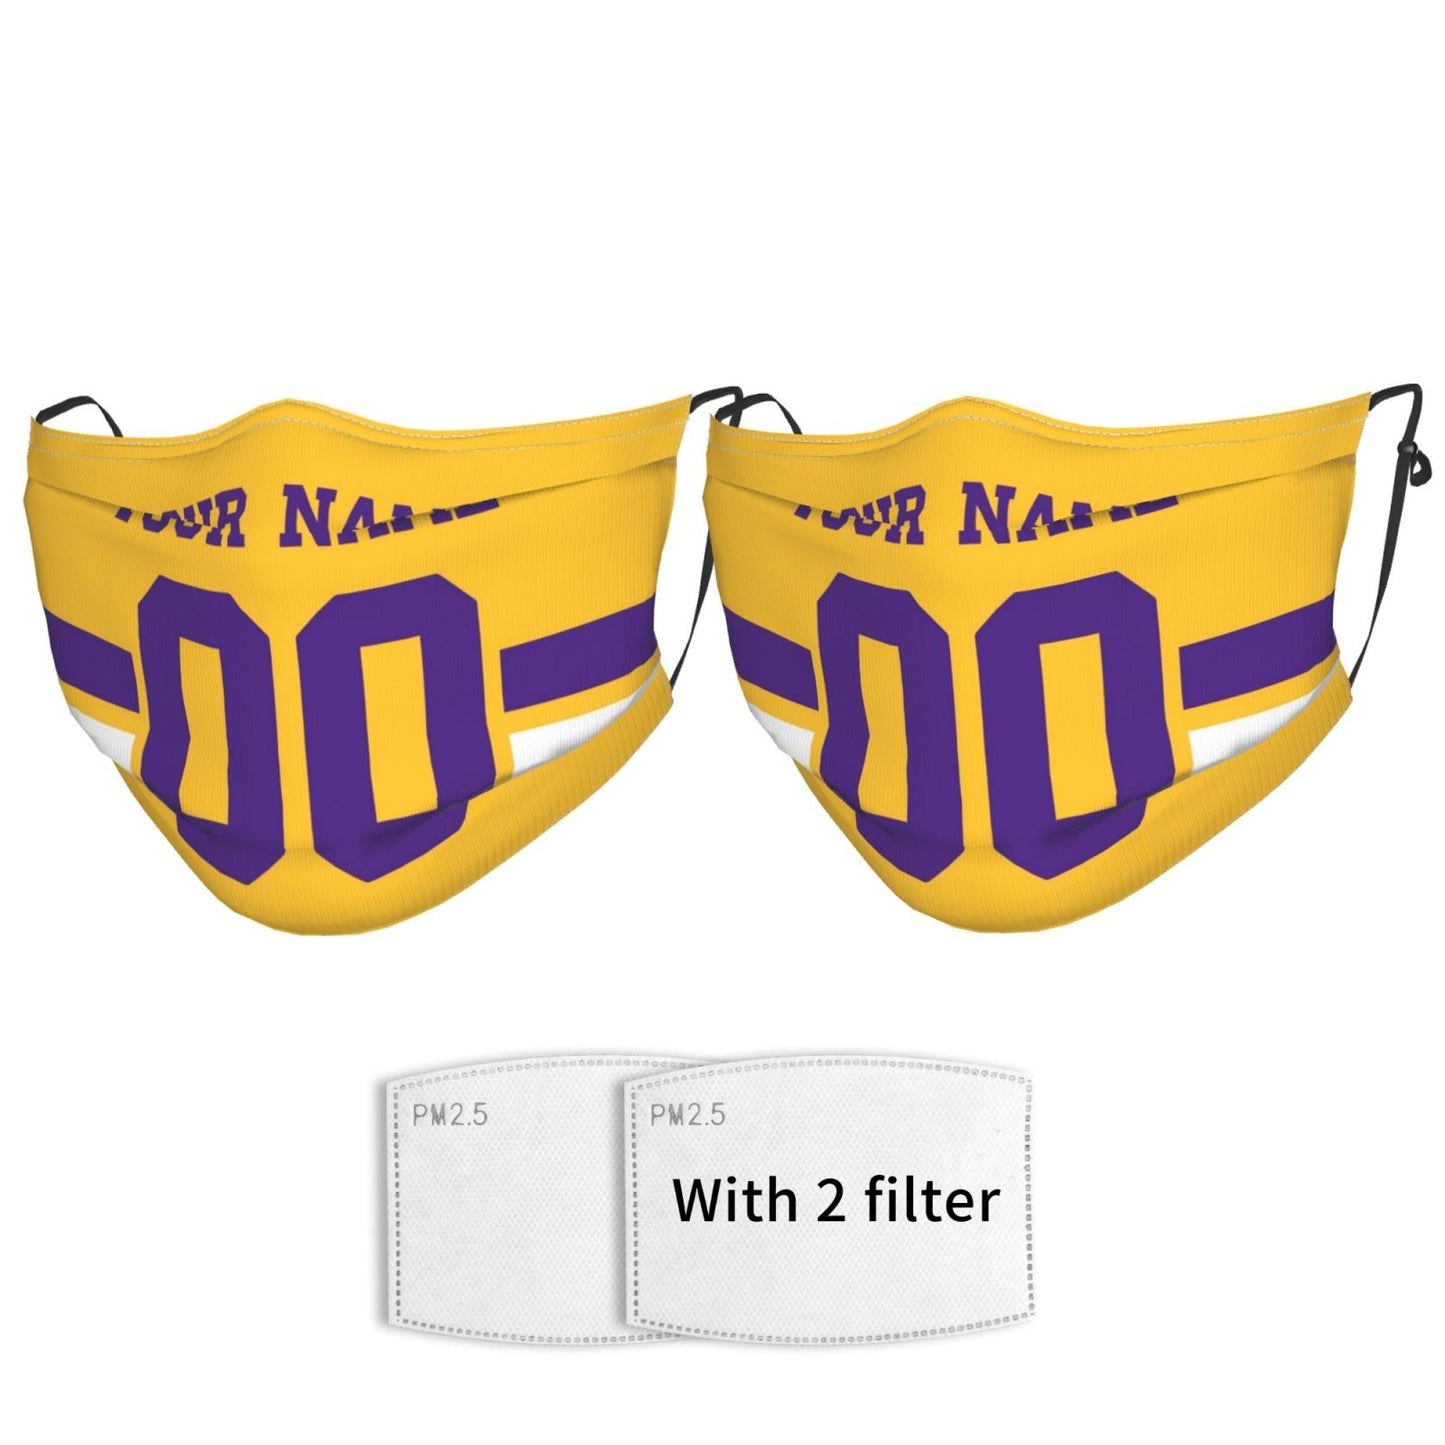 2-Pack Minnesota Vikings Face Covering Football Team Decorative Adult Face Mask With Filters PM 2.5 Gold